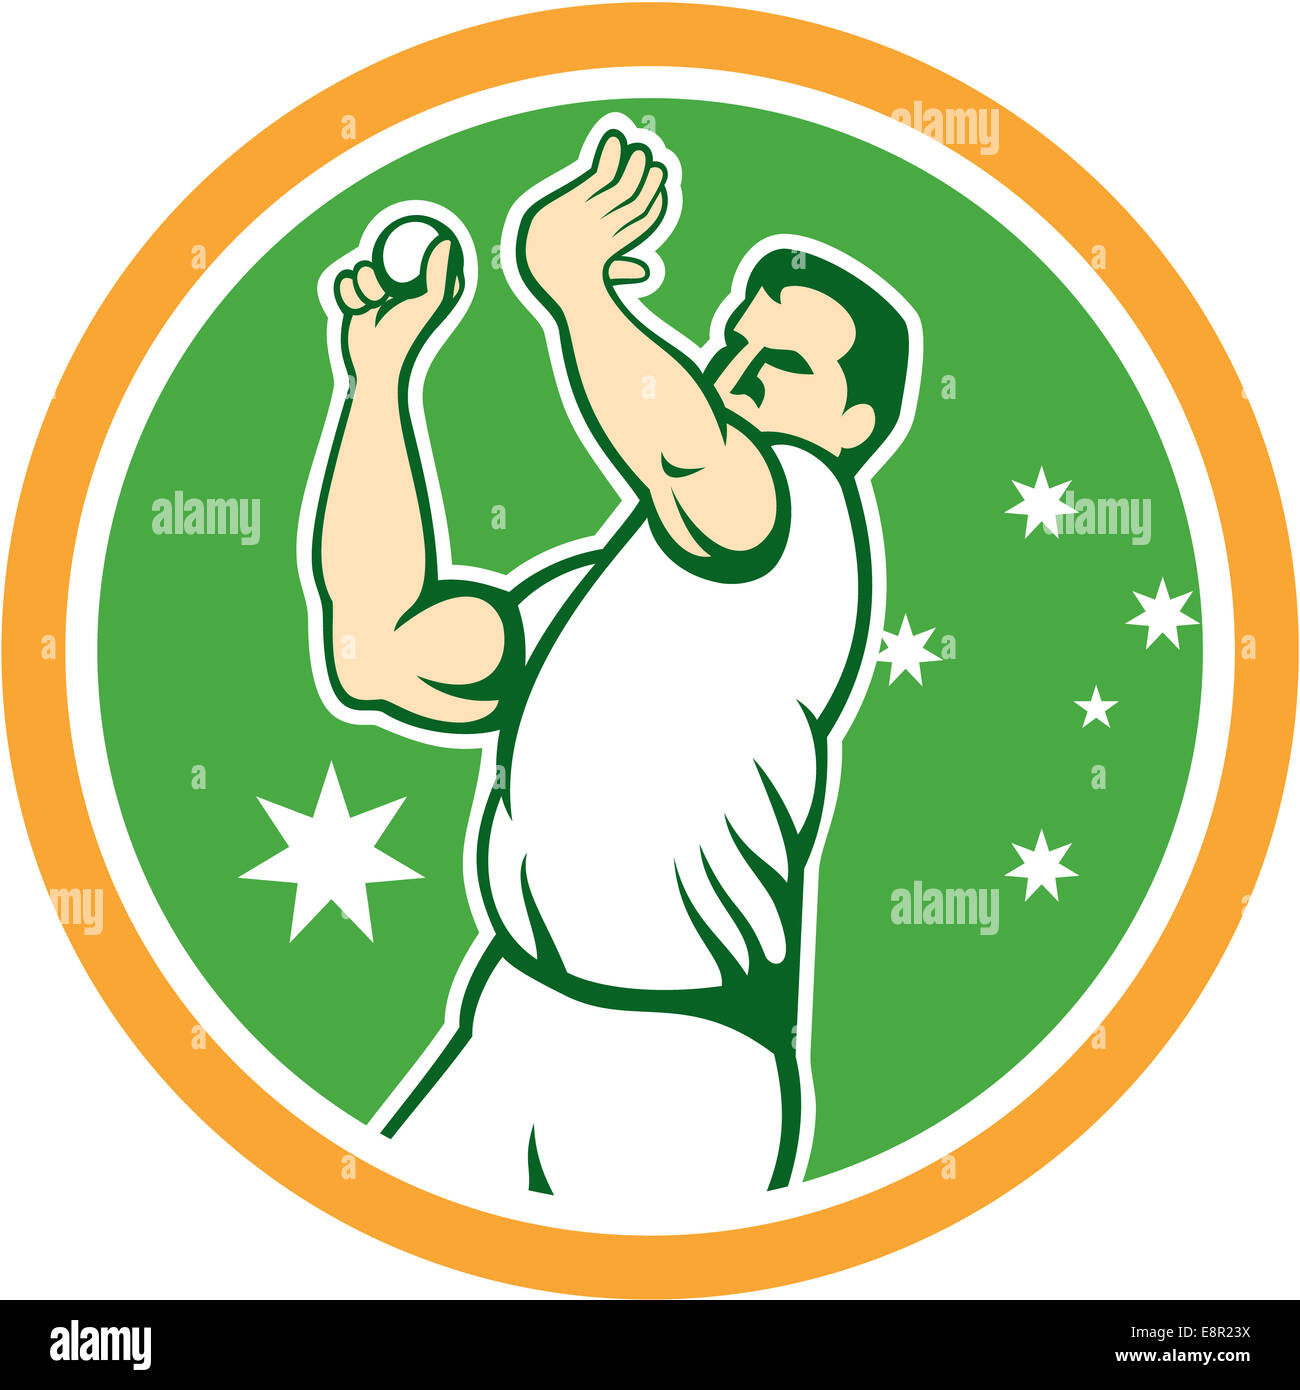 Illustration of an Australian cricket player fast bowler bowling with cricket ball set inside circle with stars in the background done in cartoon style. Stock Photo